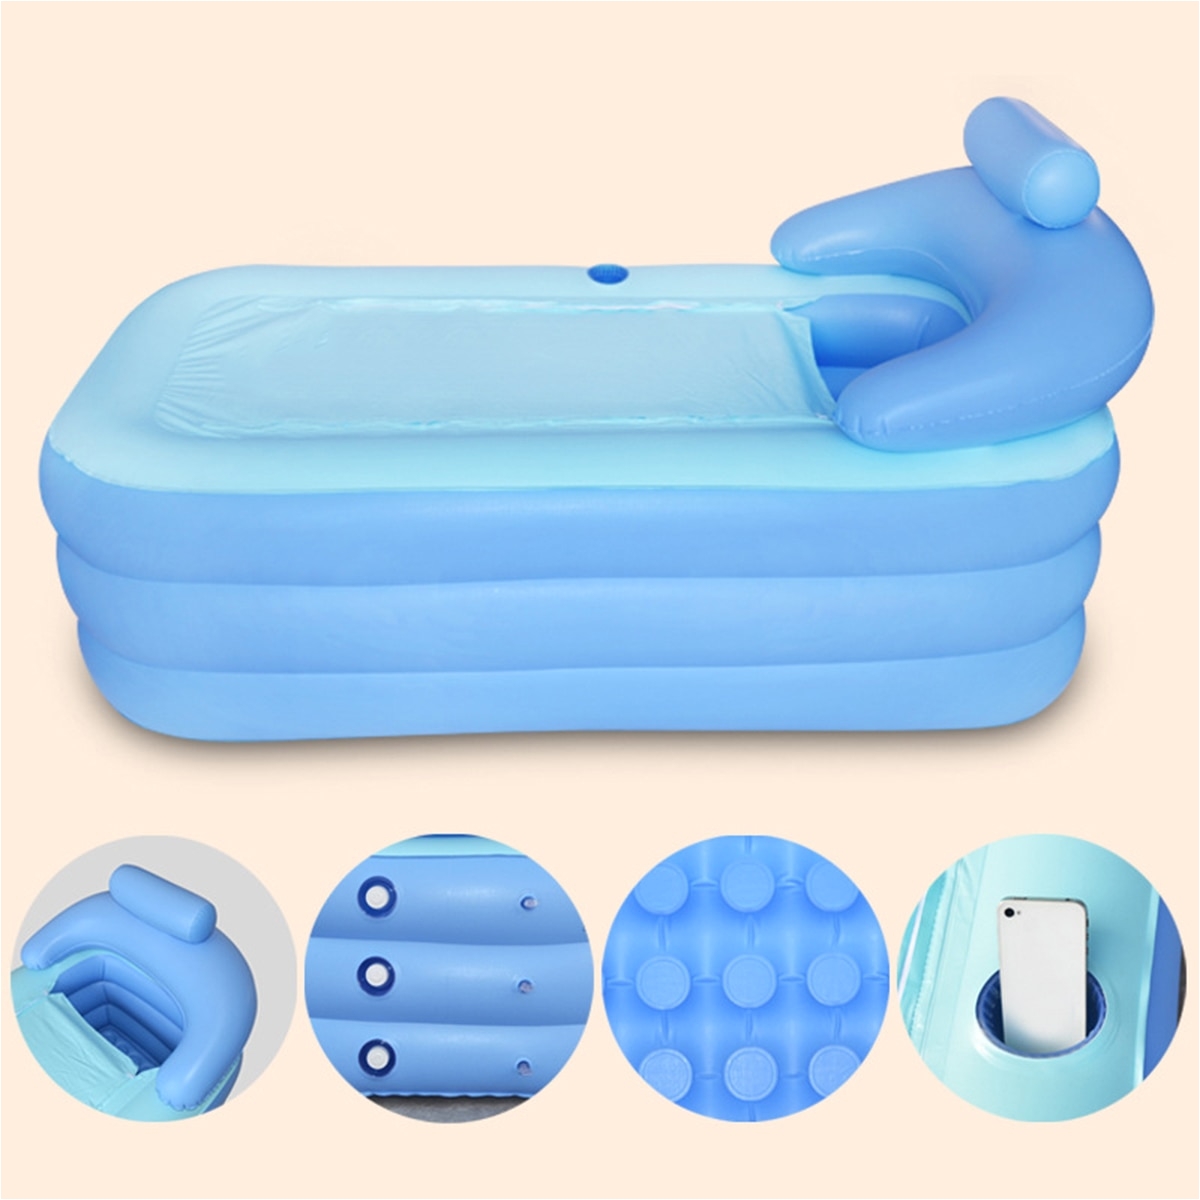 160 84 64cm big size indoor outdoor foldable inflatable bath tub pvc adult bathtub with air